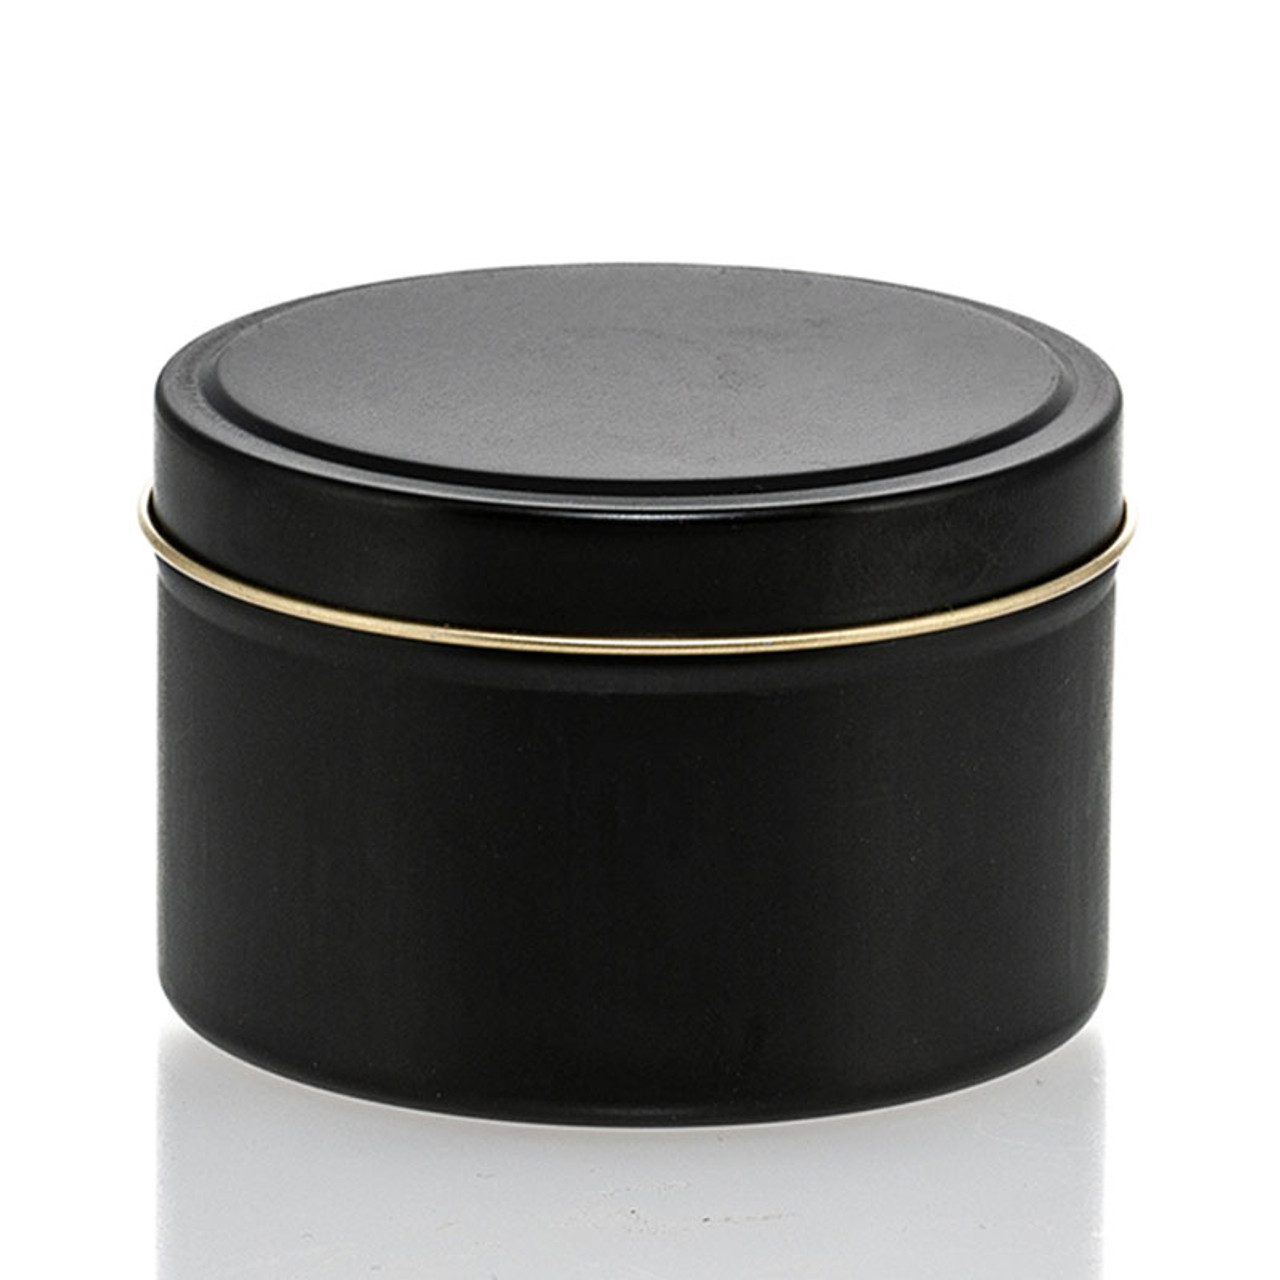 8 oz Black Candle Tin with Feet, 12 Pack